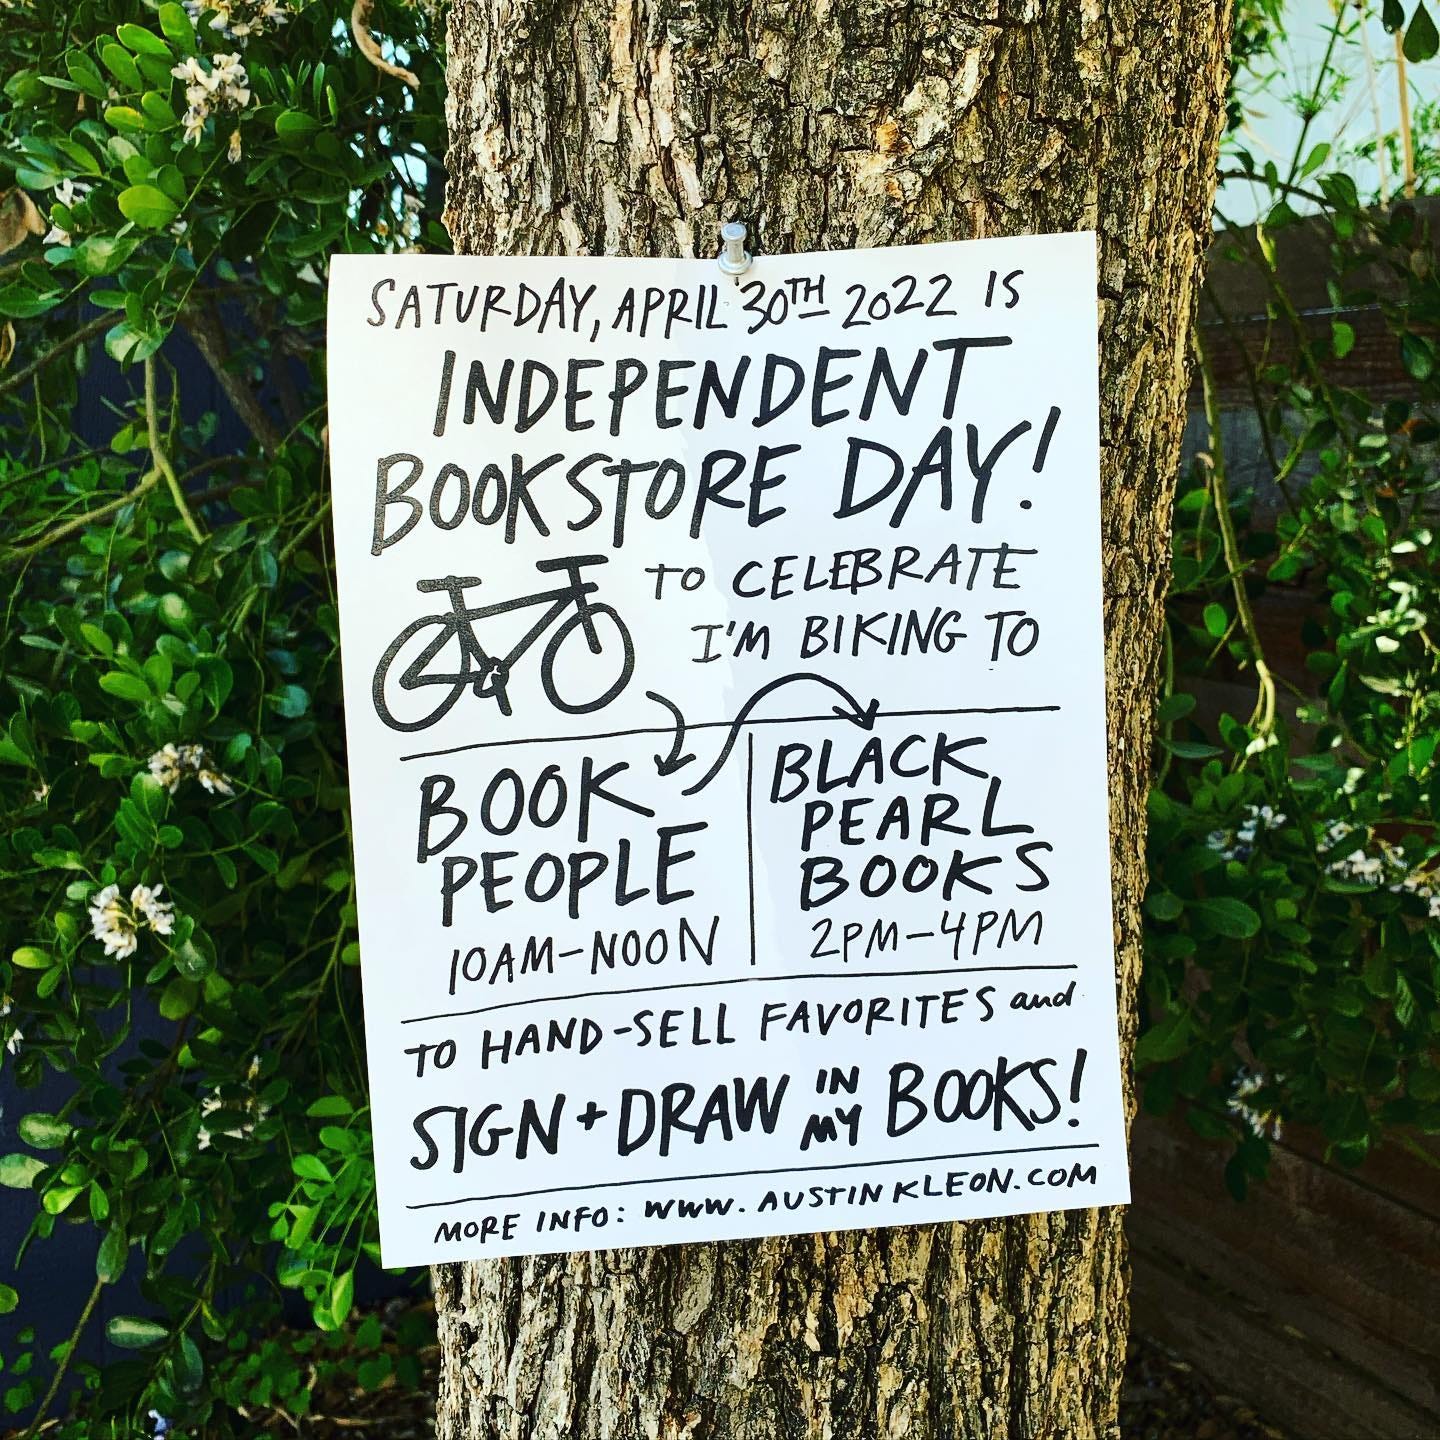 a flyer for independent bookstore day